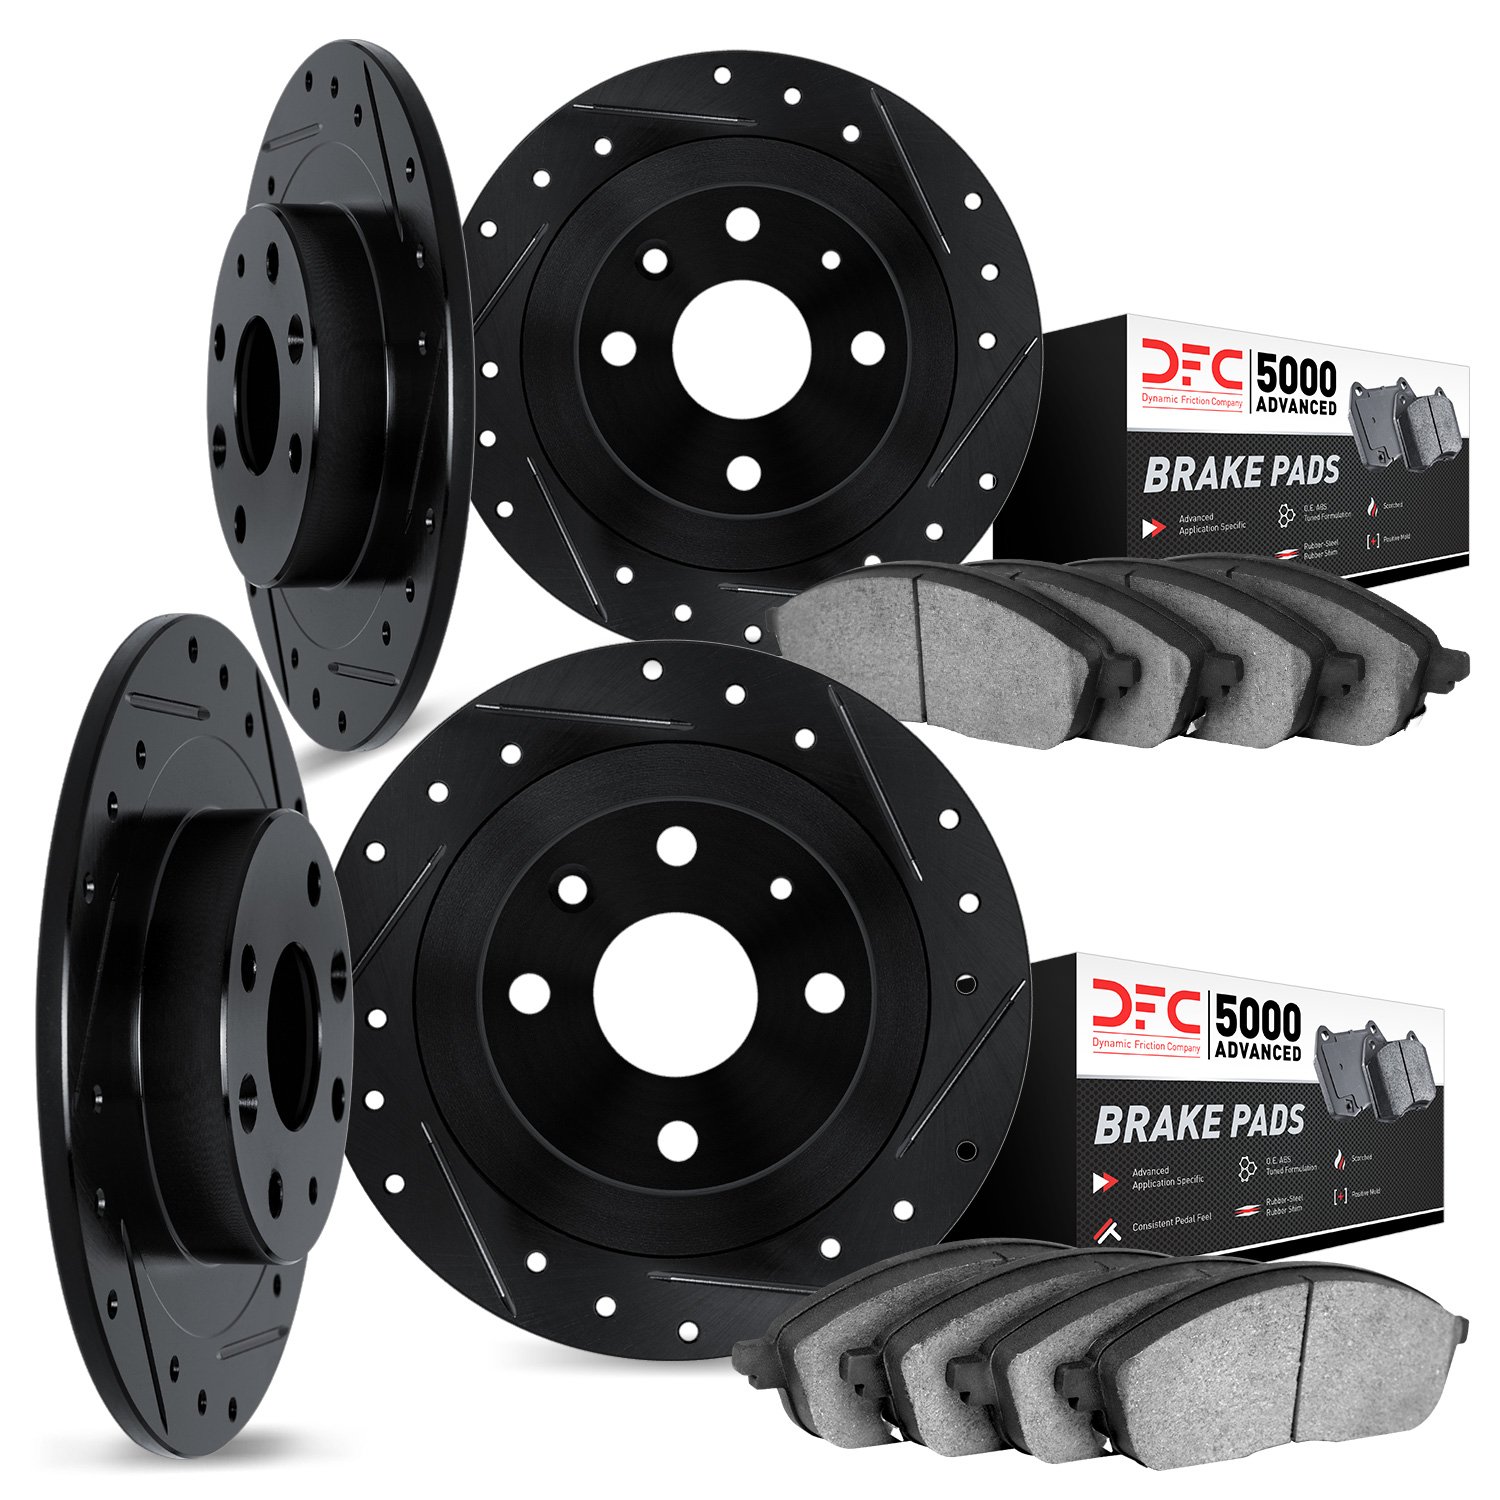 8504-67071 Drilled/Slotted Brake Rotors w/5000 Advanced Brake Pads Kit [Black], 1982-1983 Infiniti/Nissan, Position: Front and R